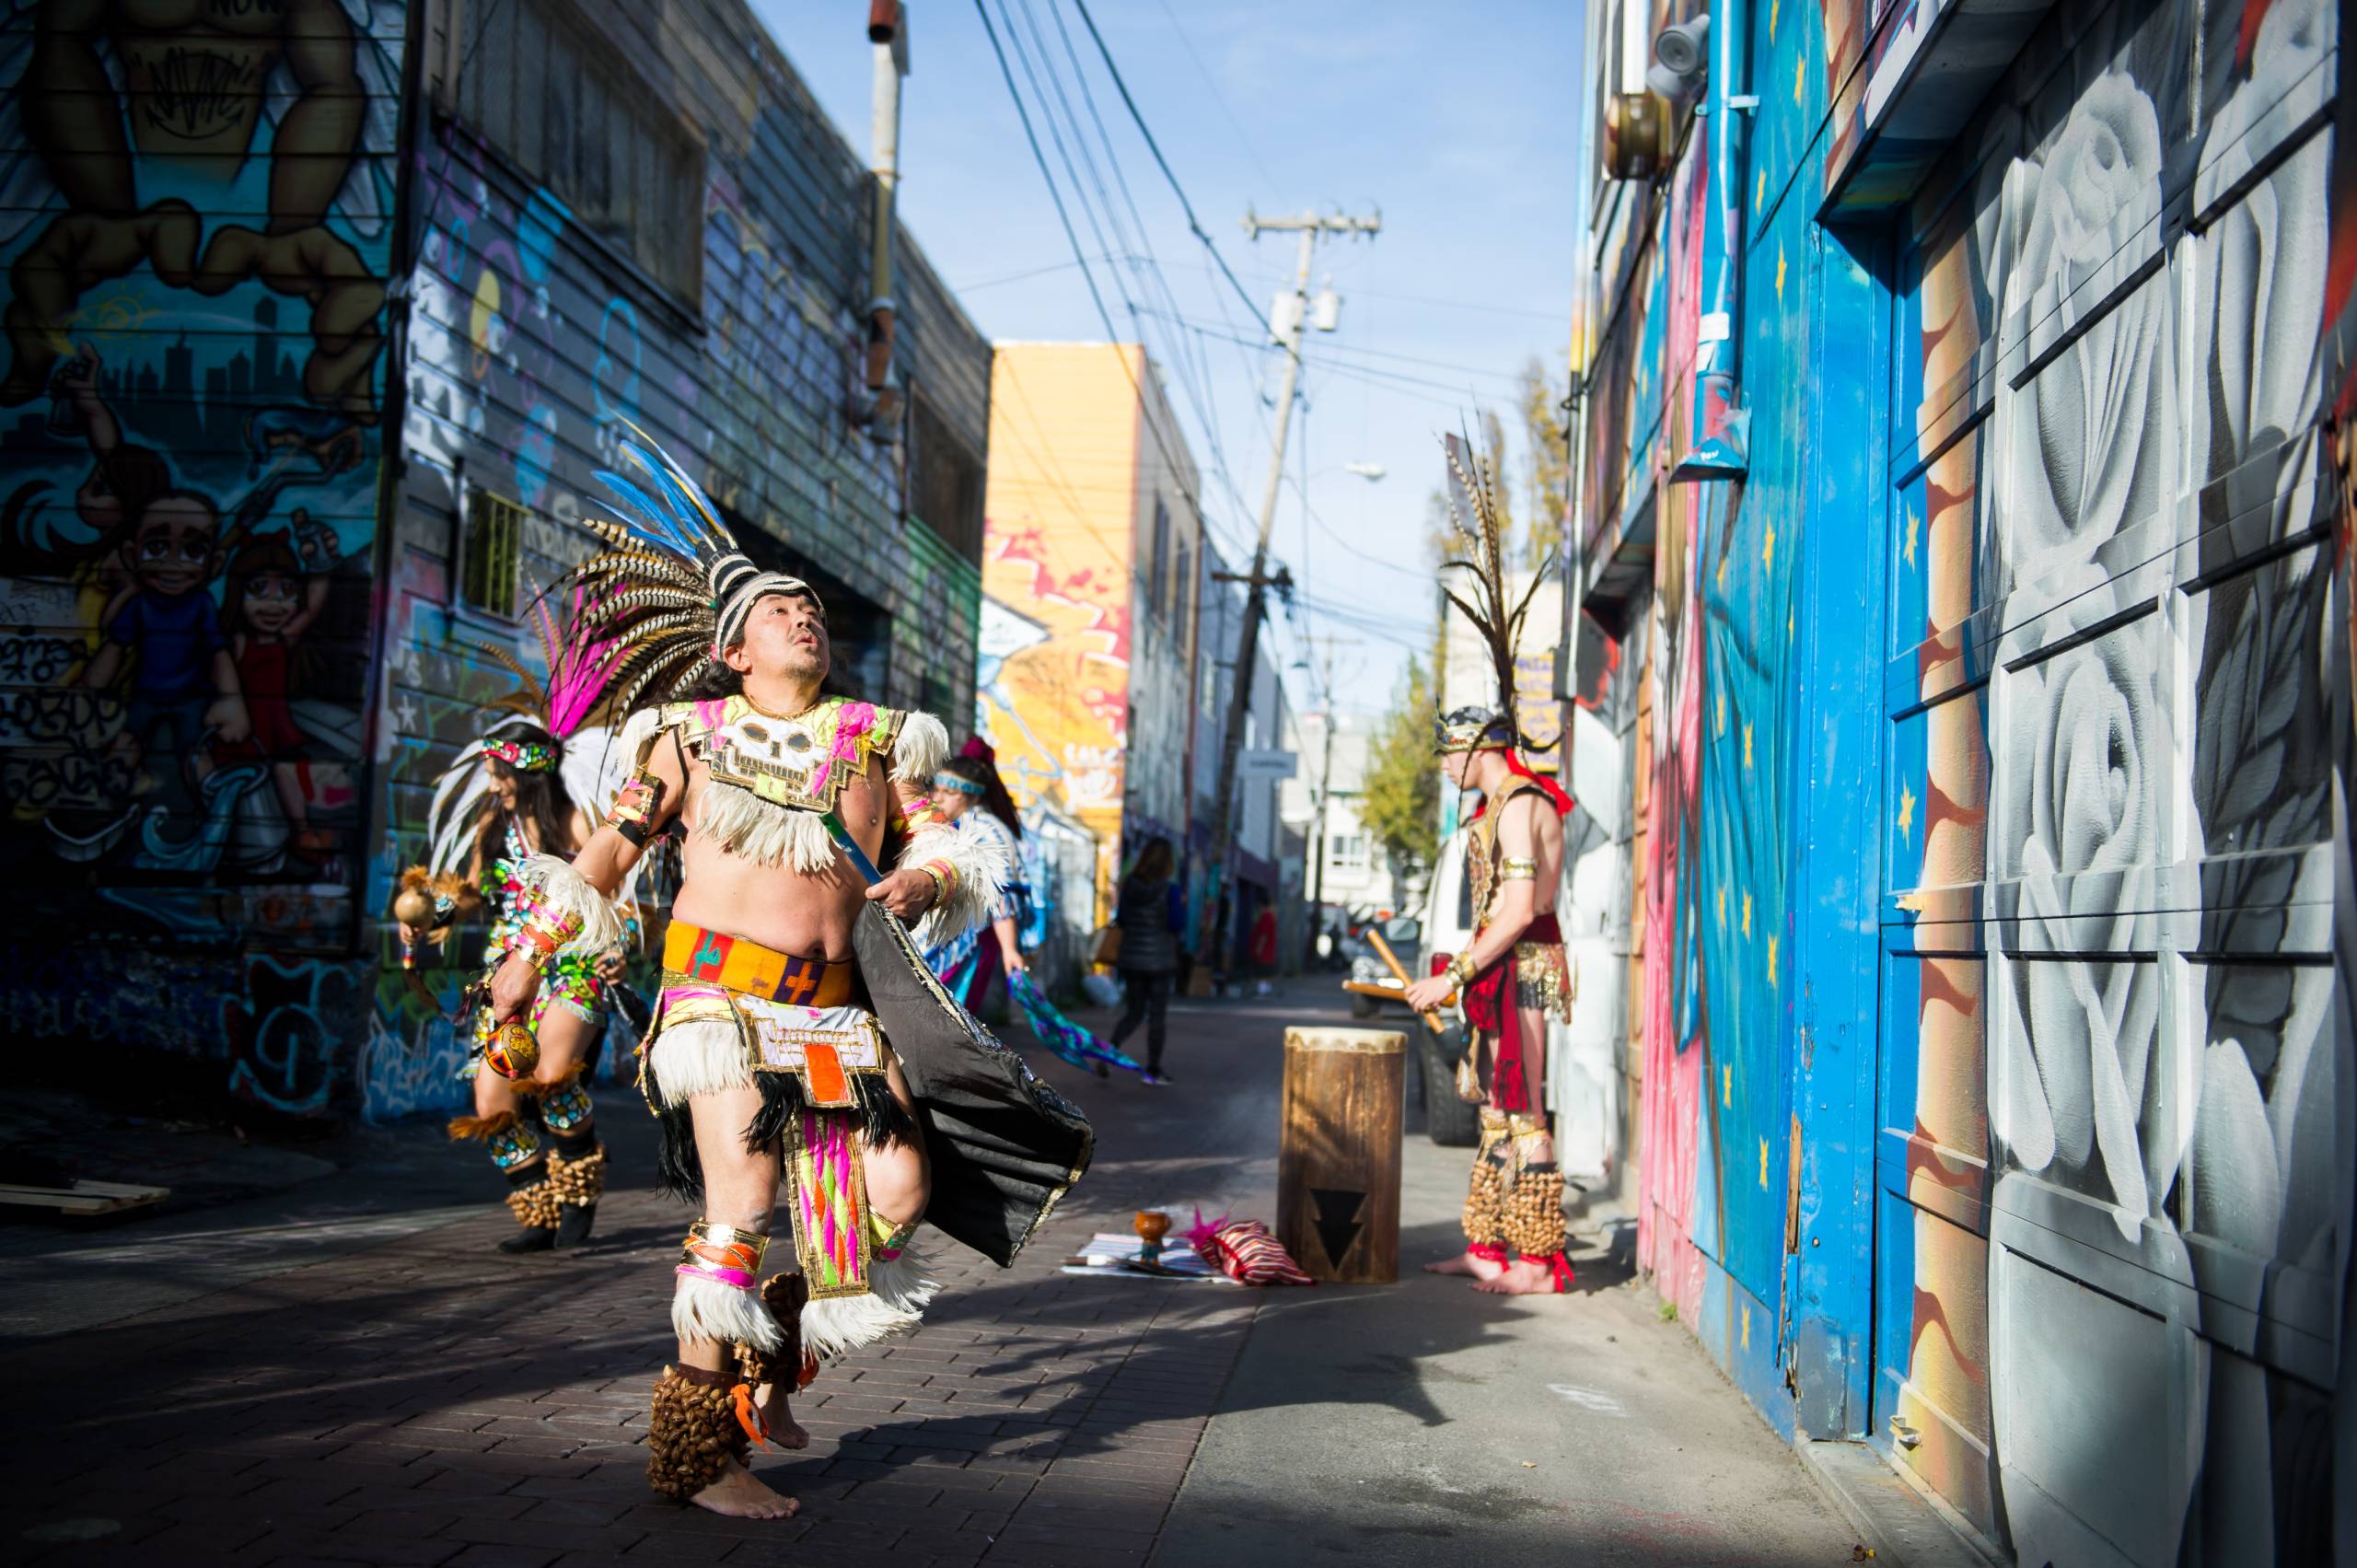 Aztec dancer in traditional dresswith head raised dances with others in a Mission District alley surrounded by colorful murals